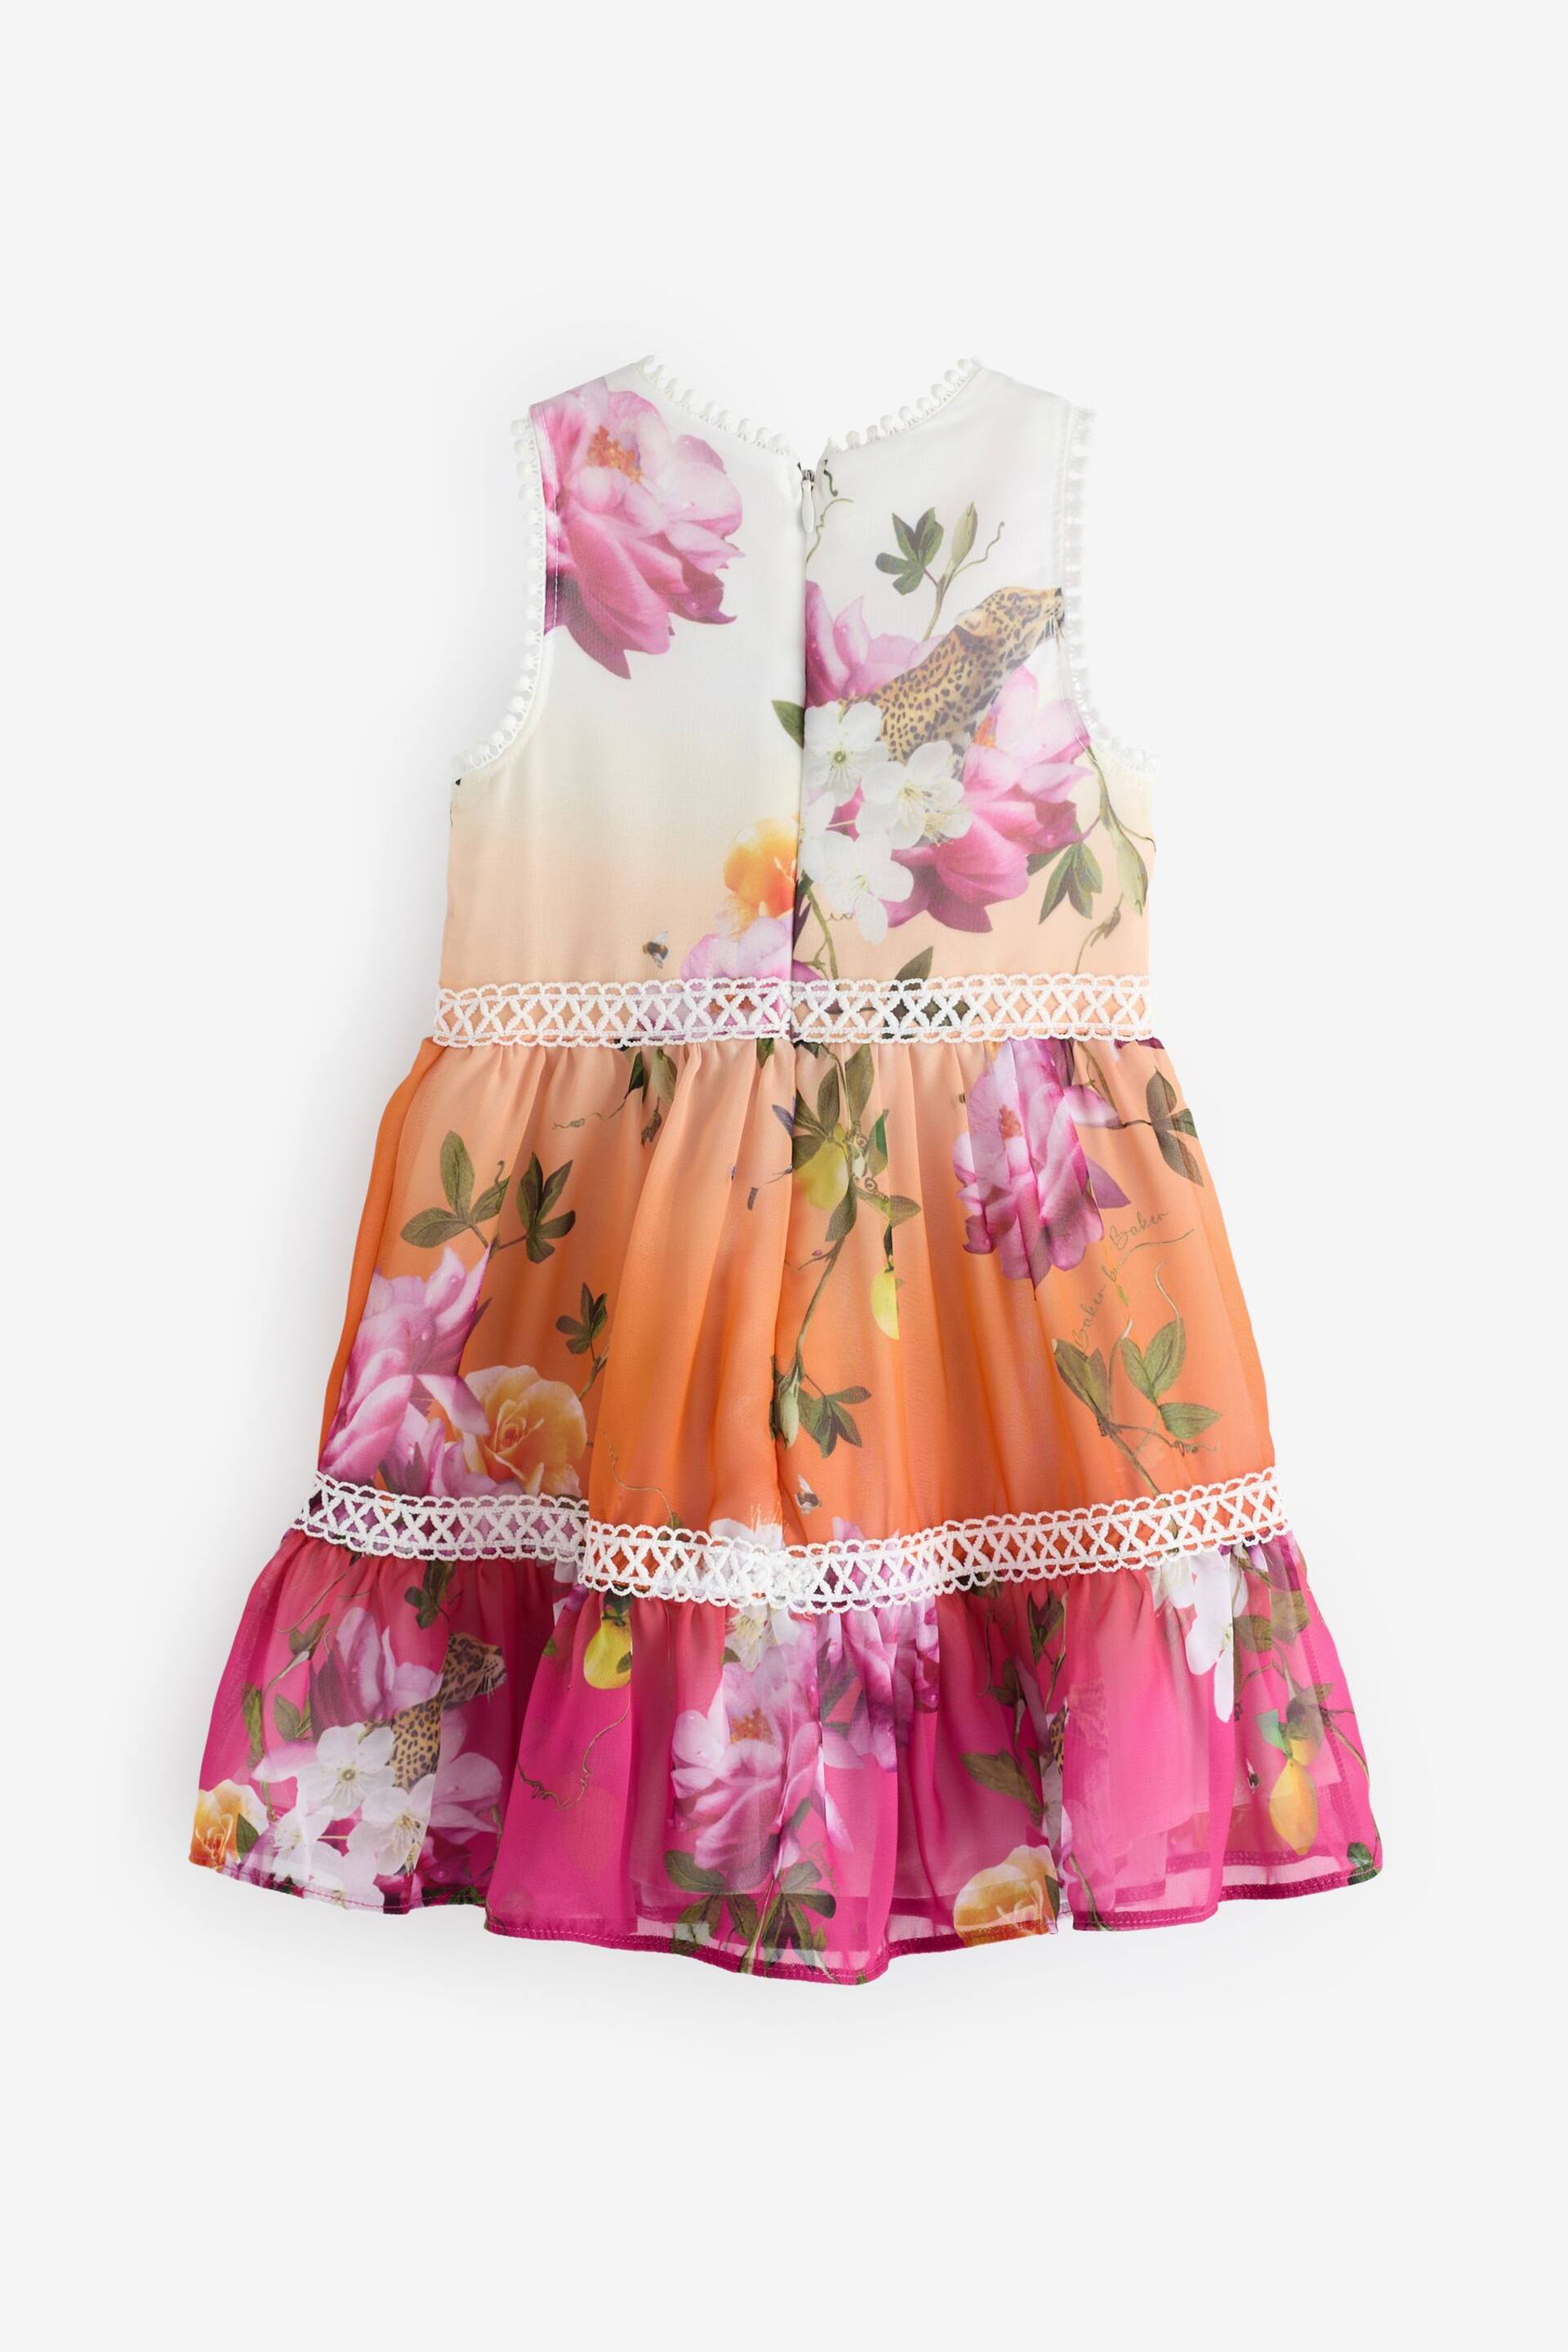 Baker by Ted Baker Multi Ombre Chiffon Dress - Image 7 of 9